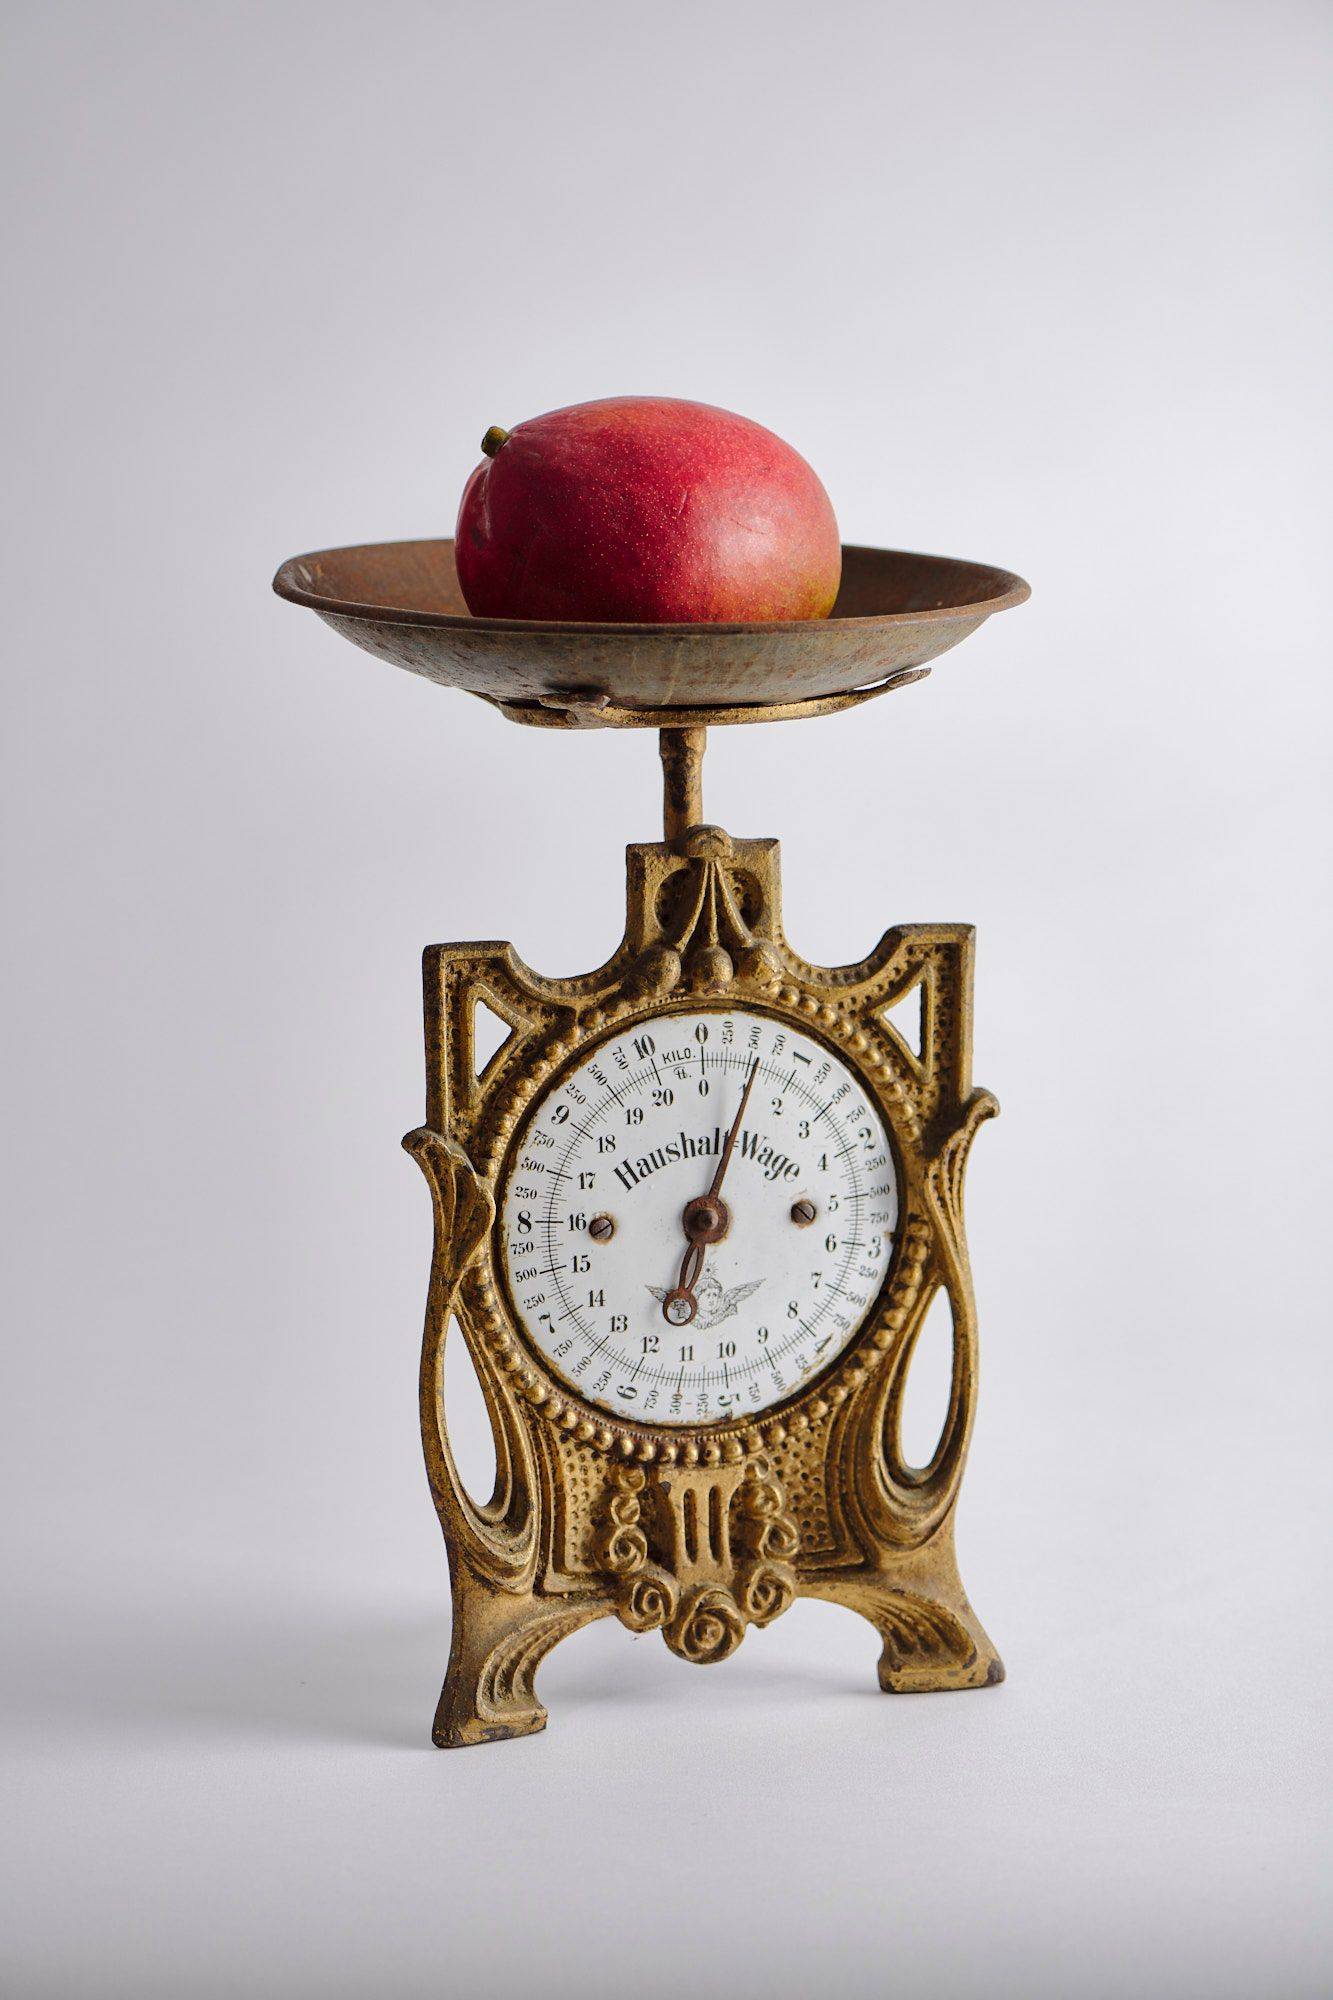 a mango on a vintage scale with white background